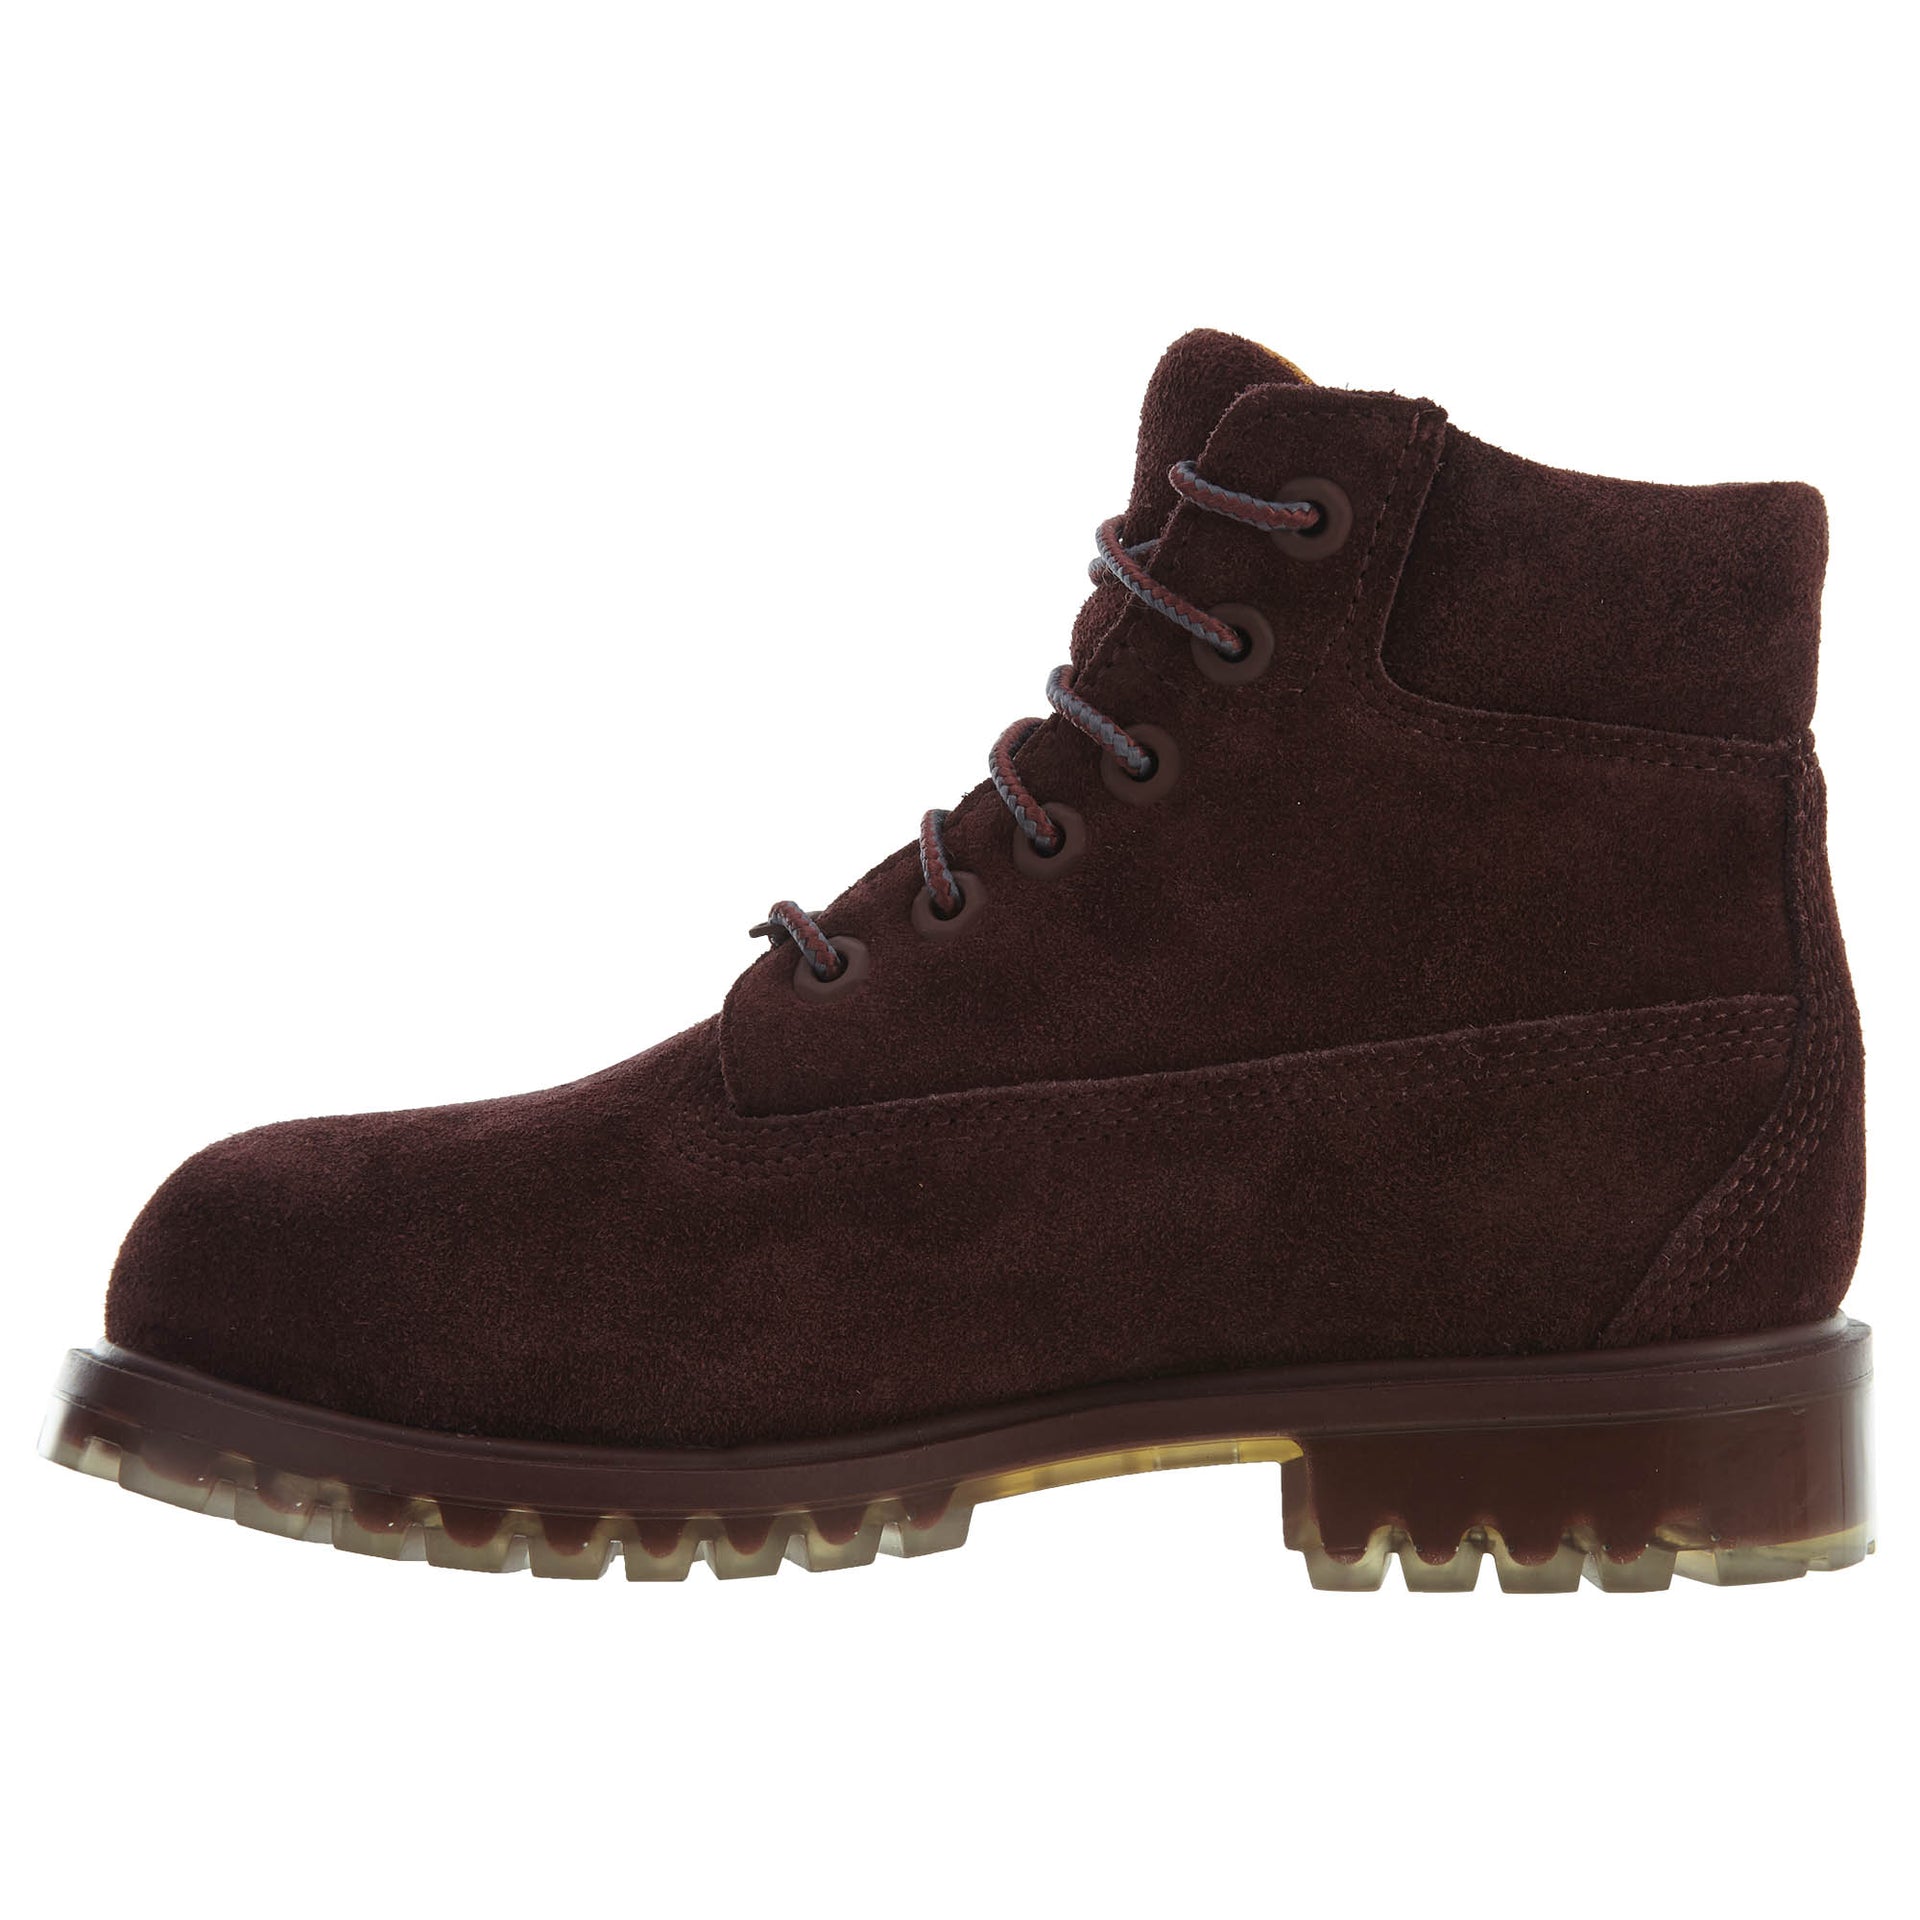 Timberland 6" Tpu Outsole Waterproof Suede Big Kids Style : Tb0a1ahq